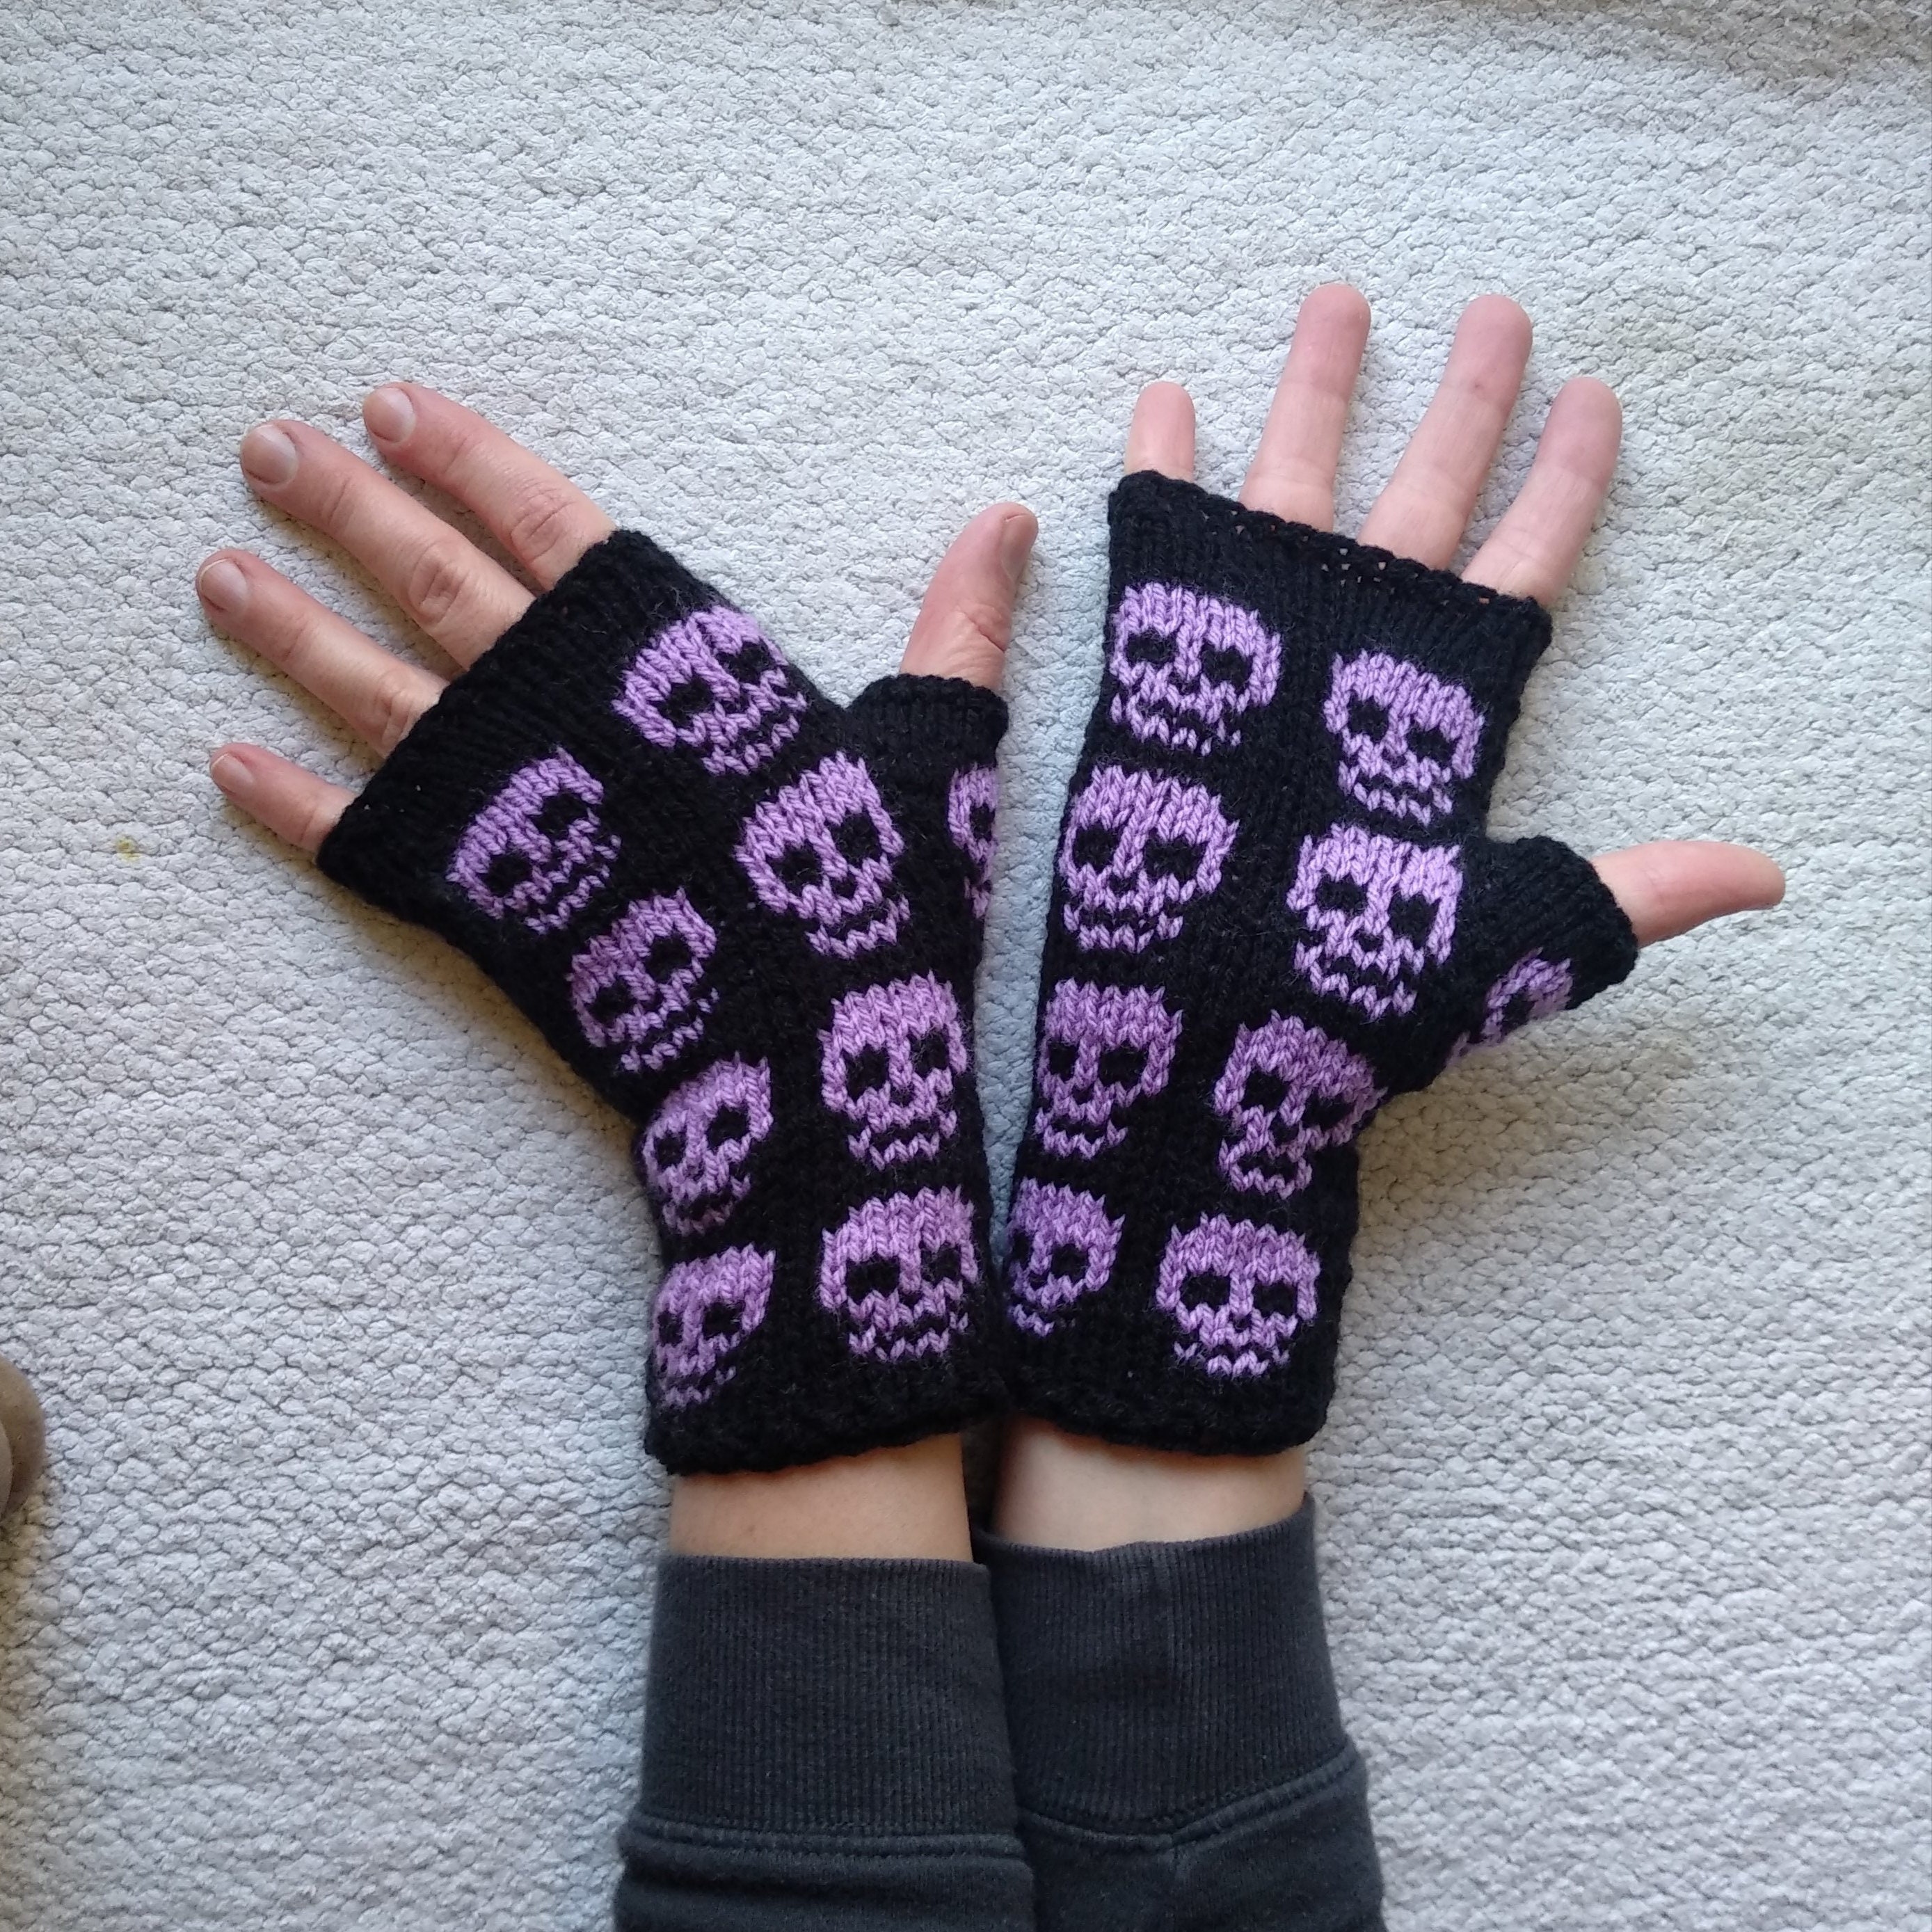 Goth Arm Warmers With Purple Skulls, Emo Fingerless Gloves With Pink  Skeletons, Halloween Mittens, Women Gothic Wrist Warmers Gift -  Canada